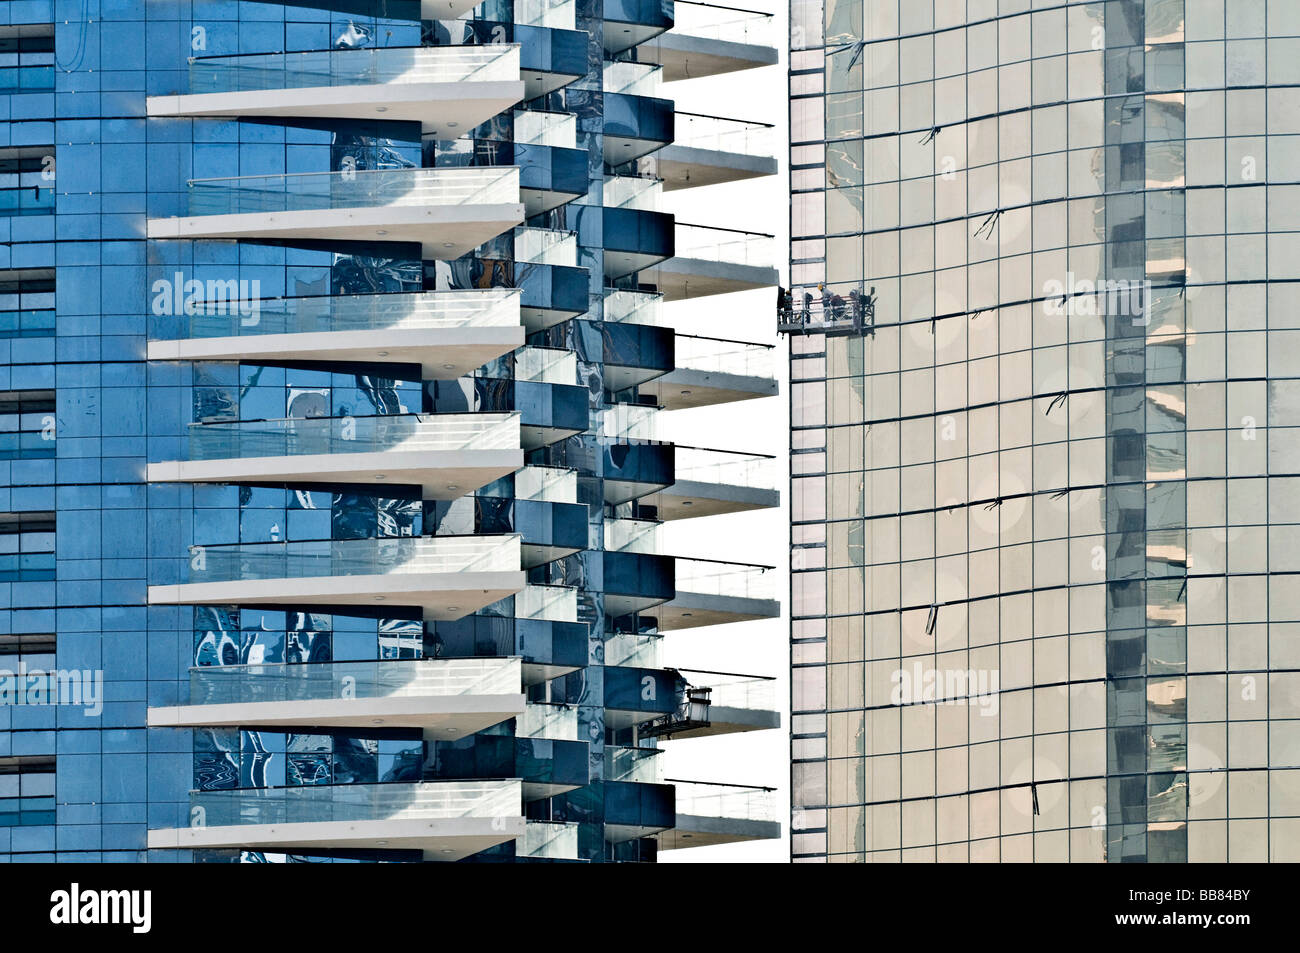 Window cleaner in front of highrise glass front, Dubai, United Arab Emirates Stock Photo